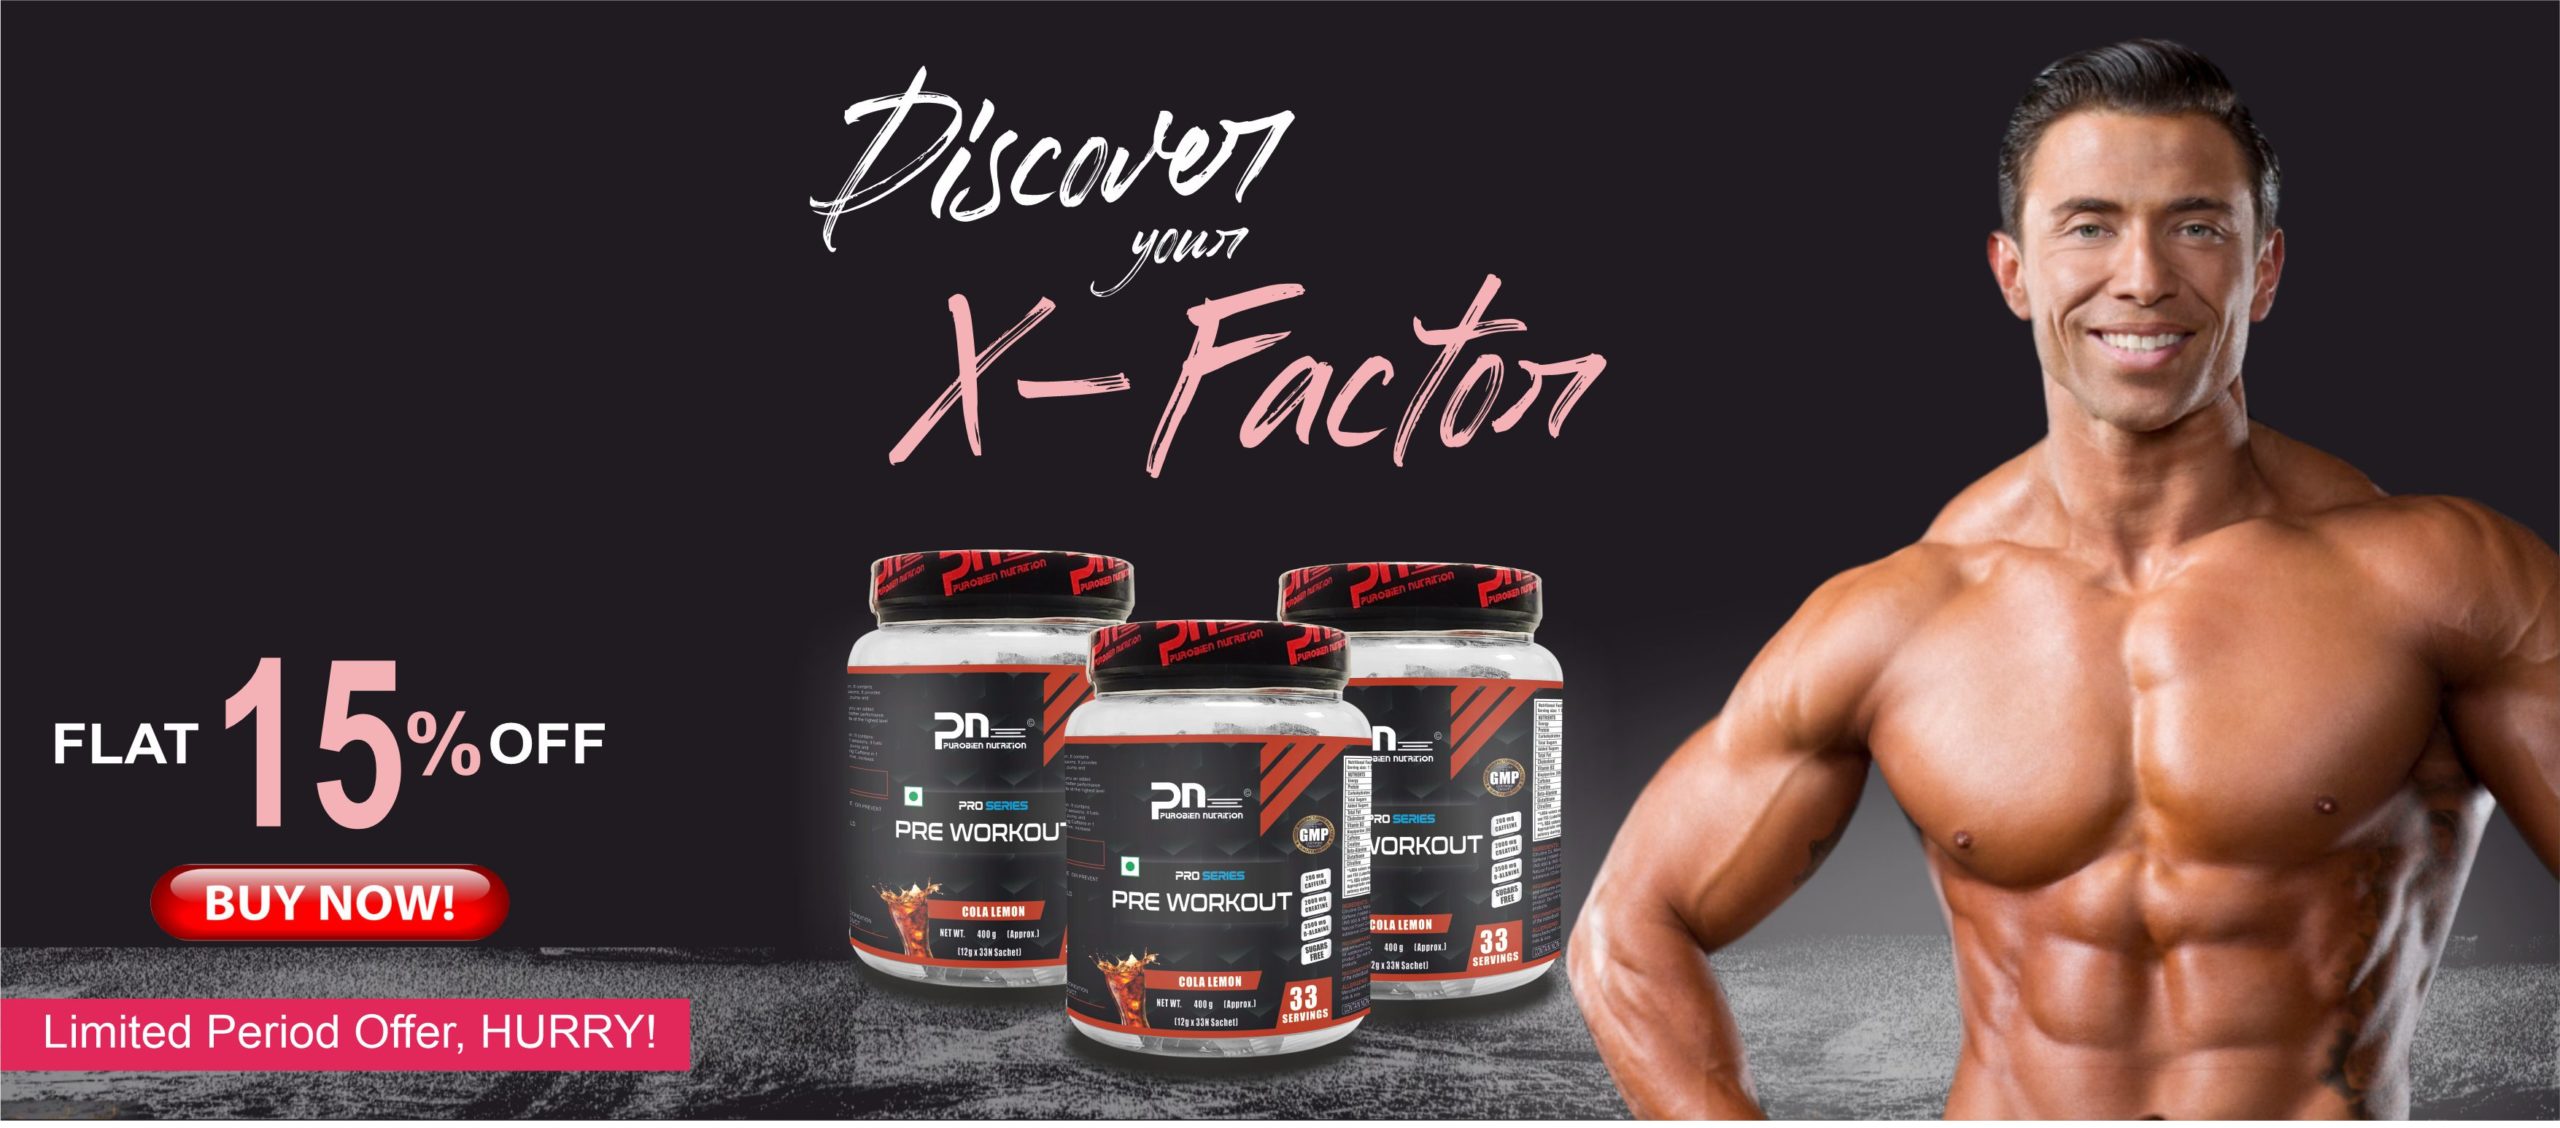 Top 5 Supplement Company in India